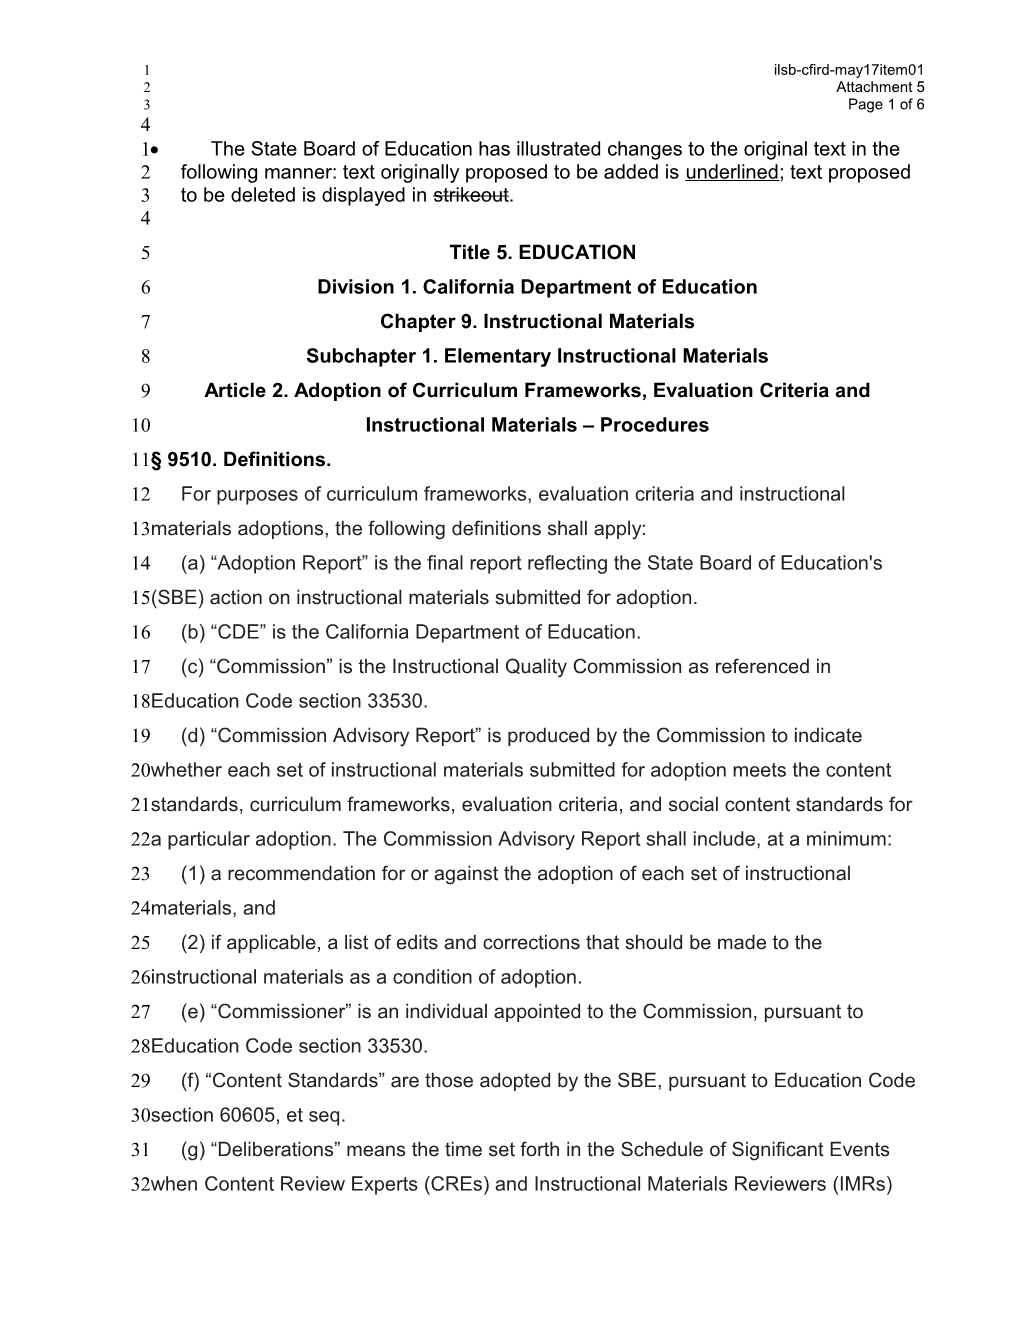 CFIRD Clean up Regulations - Laws & Regulations (CA State Board of Education)